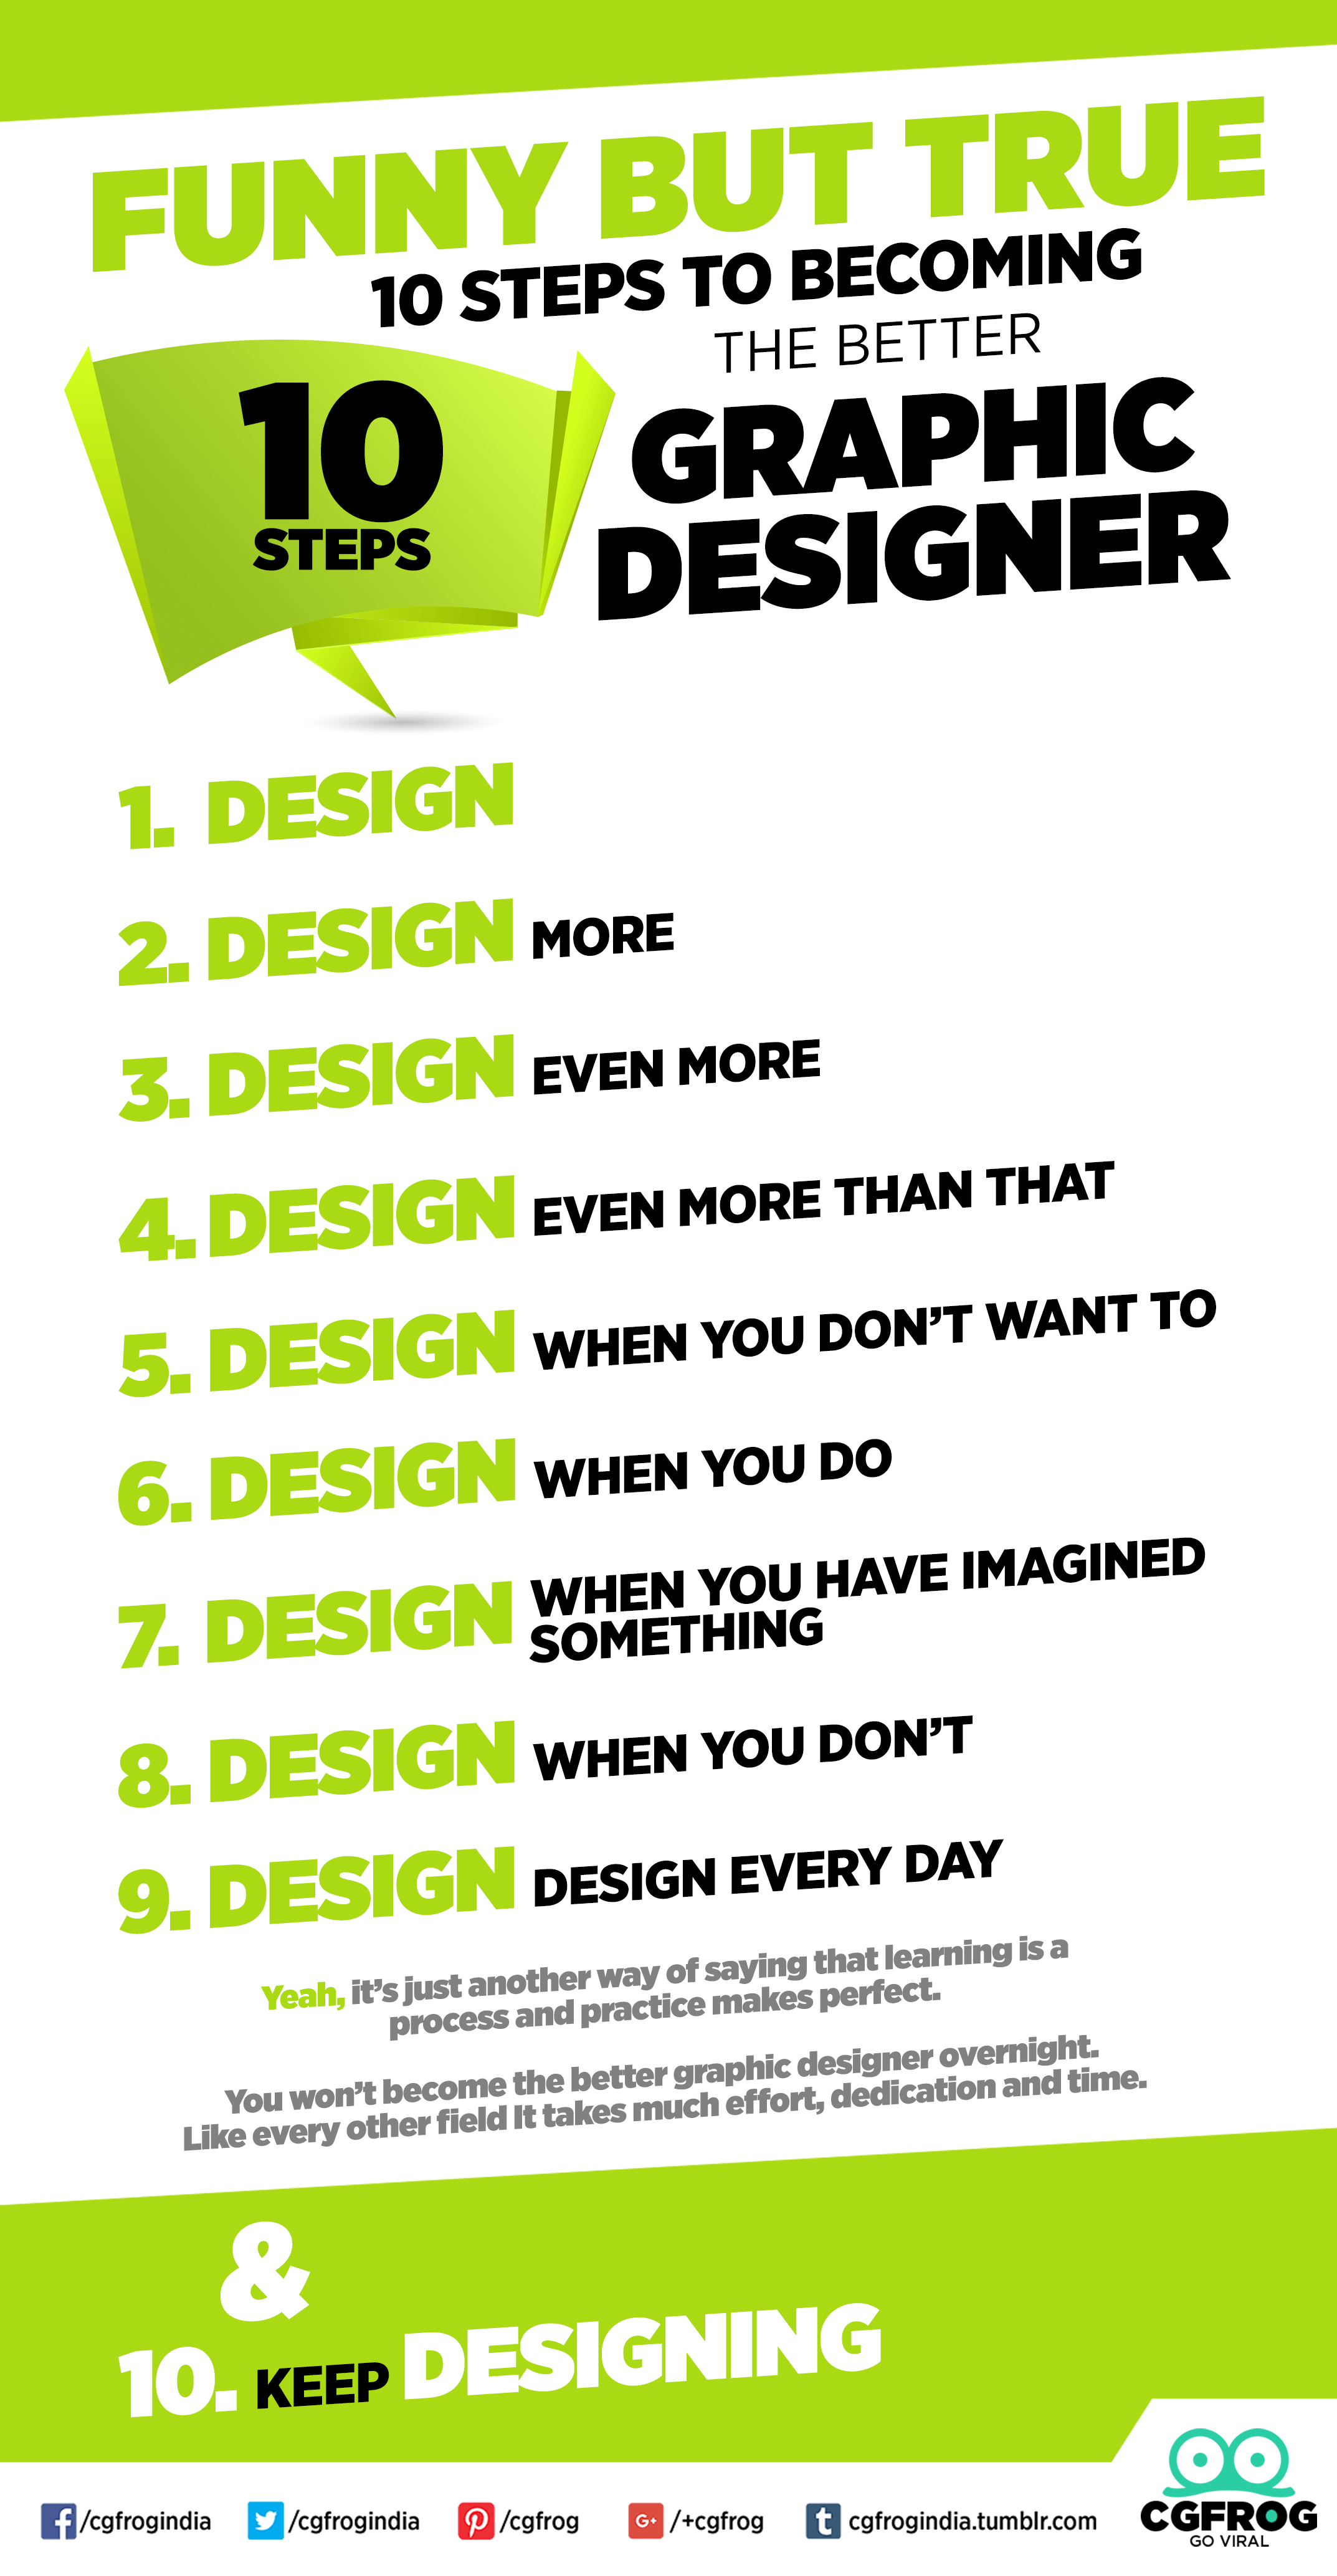 Funny But True: 10 Steps To Becoming The Better Graphic Designer | CGfrog